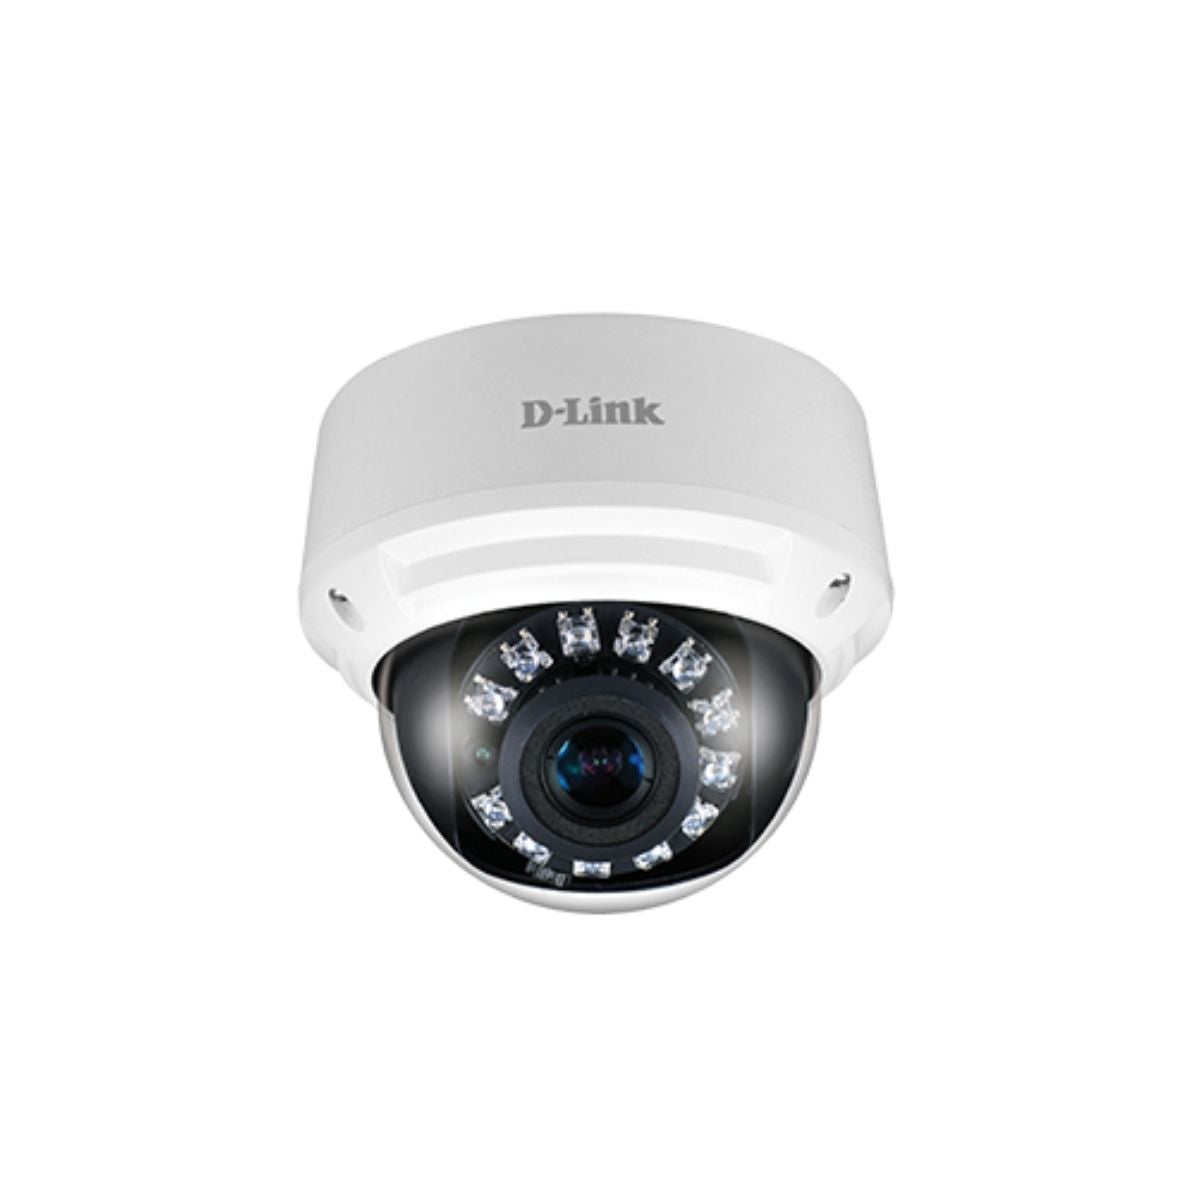 D-Link DCS-F4622E 2 MP Full HD Day & Night Varifocal Enhanced Outdoor Dome Network Camera - Ooberpad